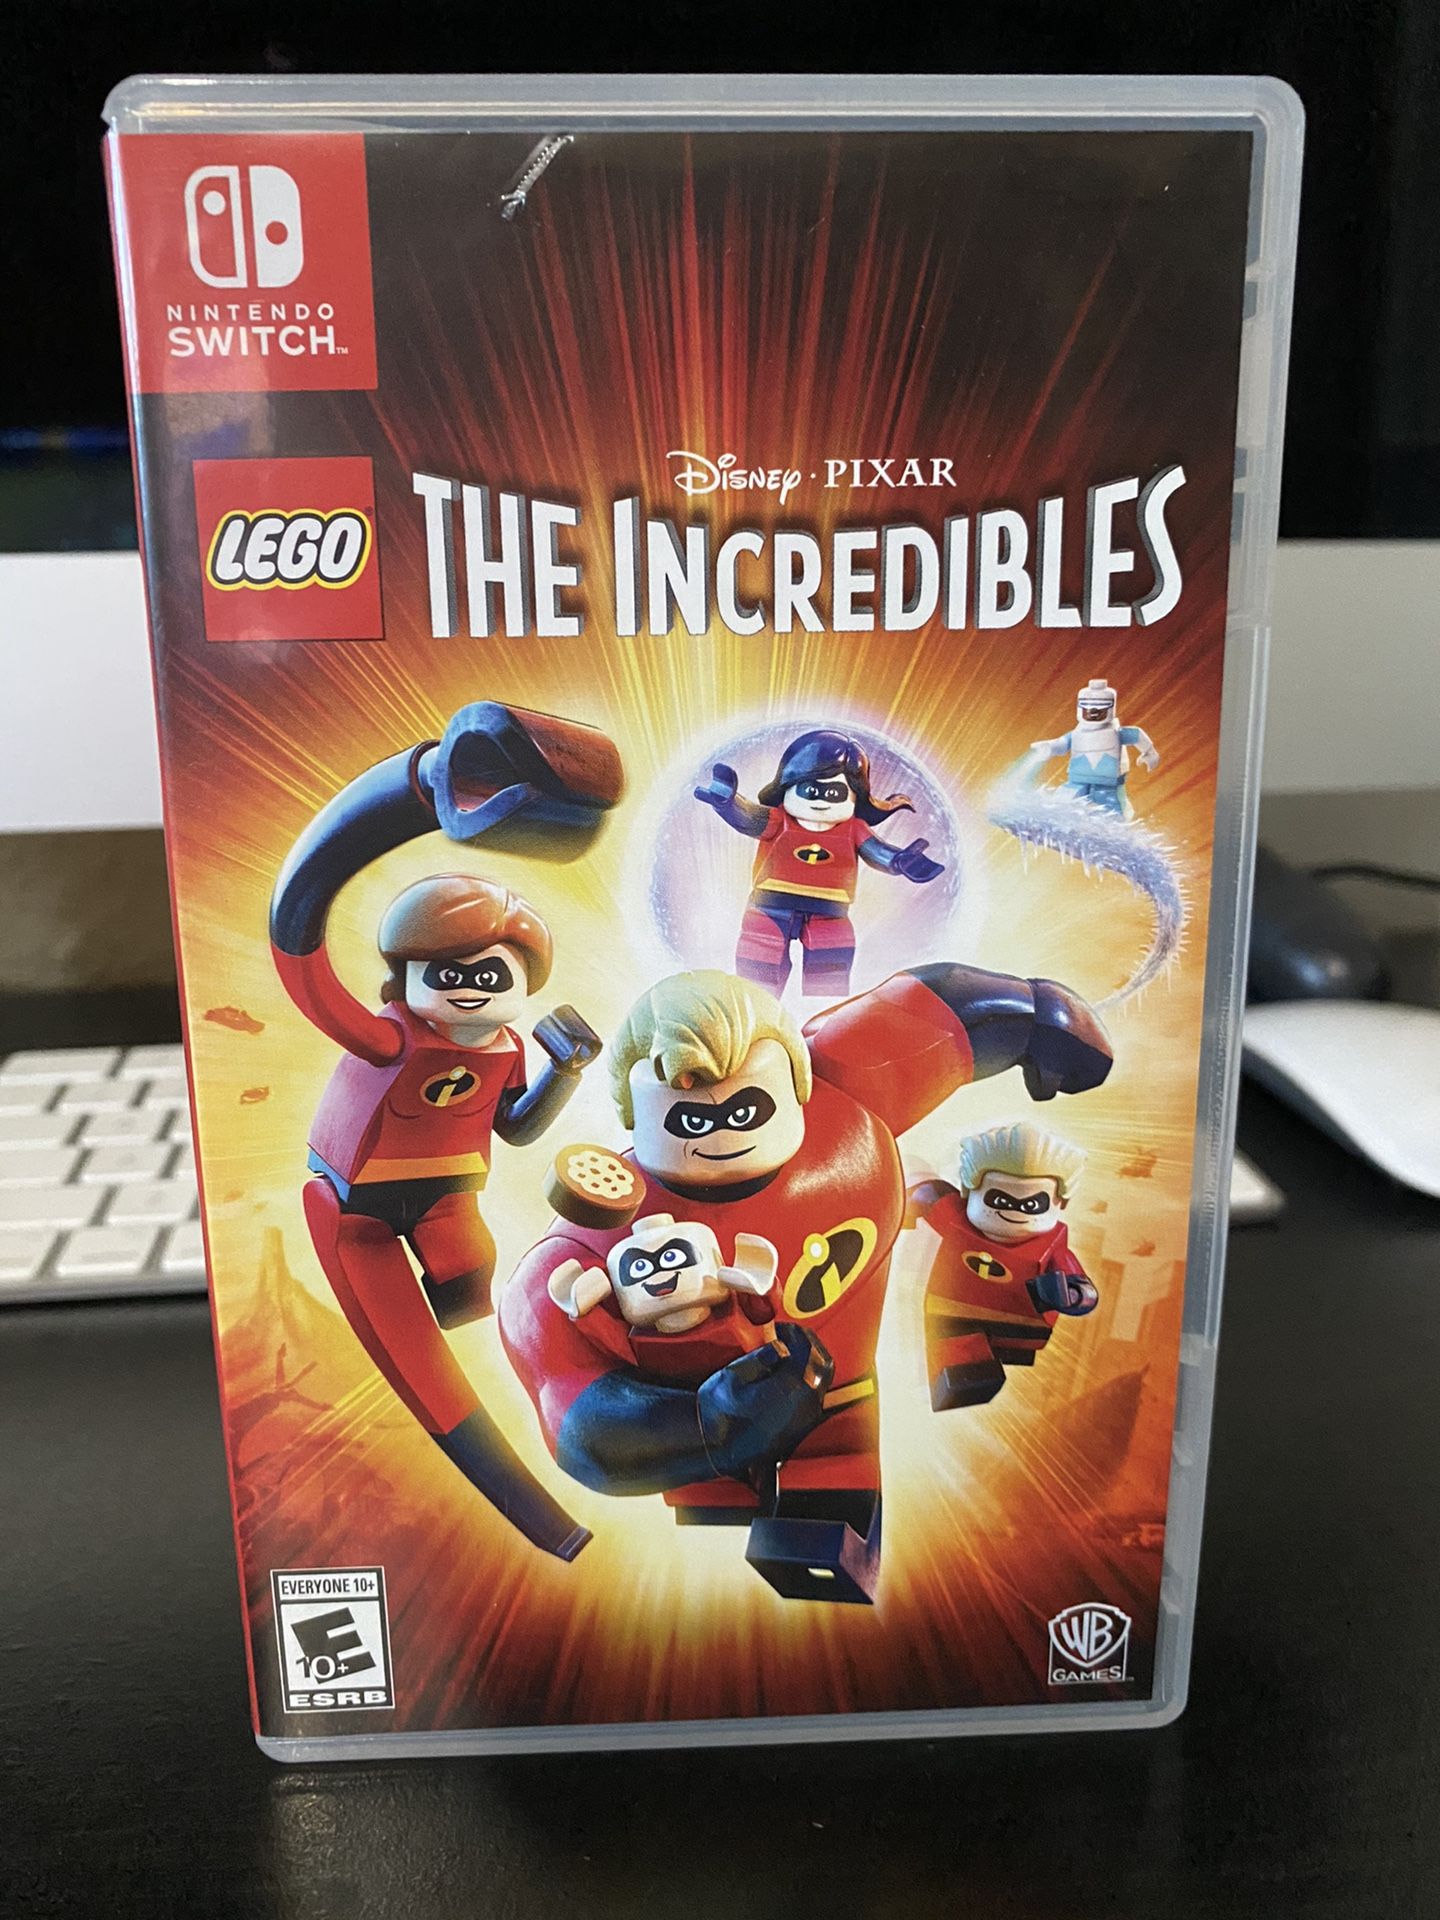 LEGO The incredibles for Nintendo switch